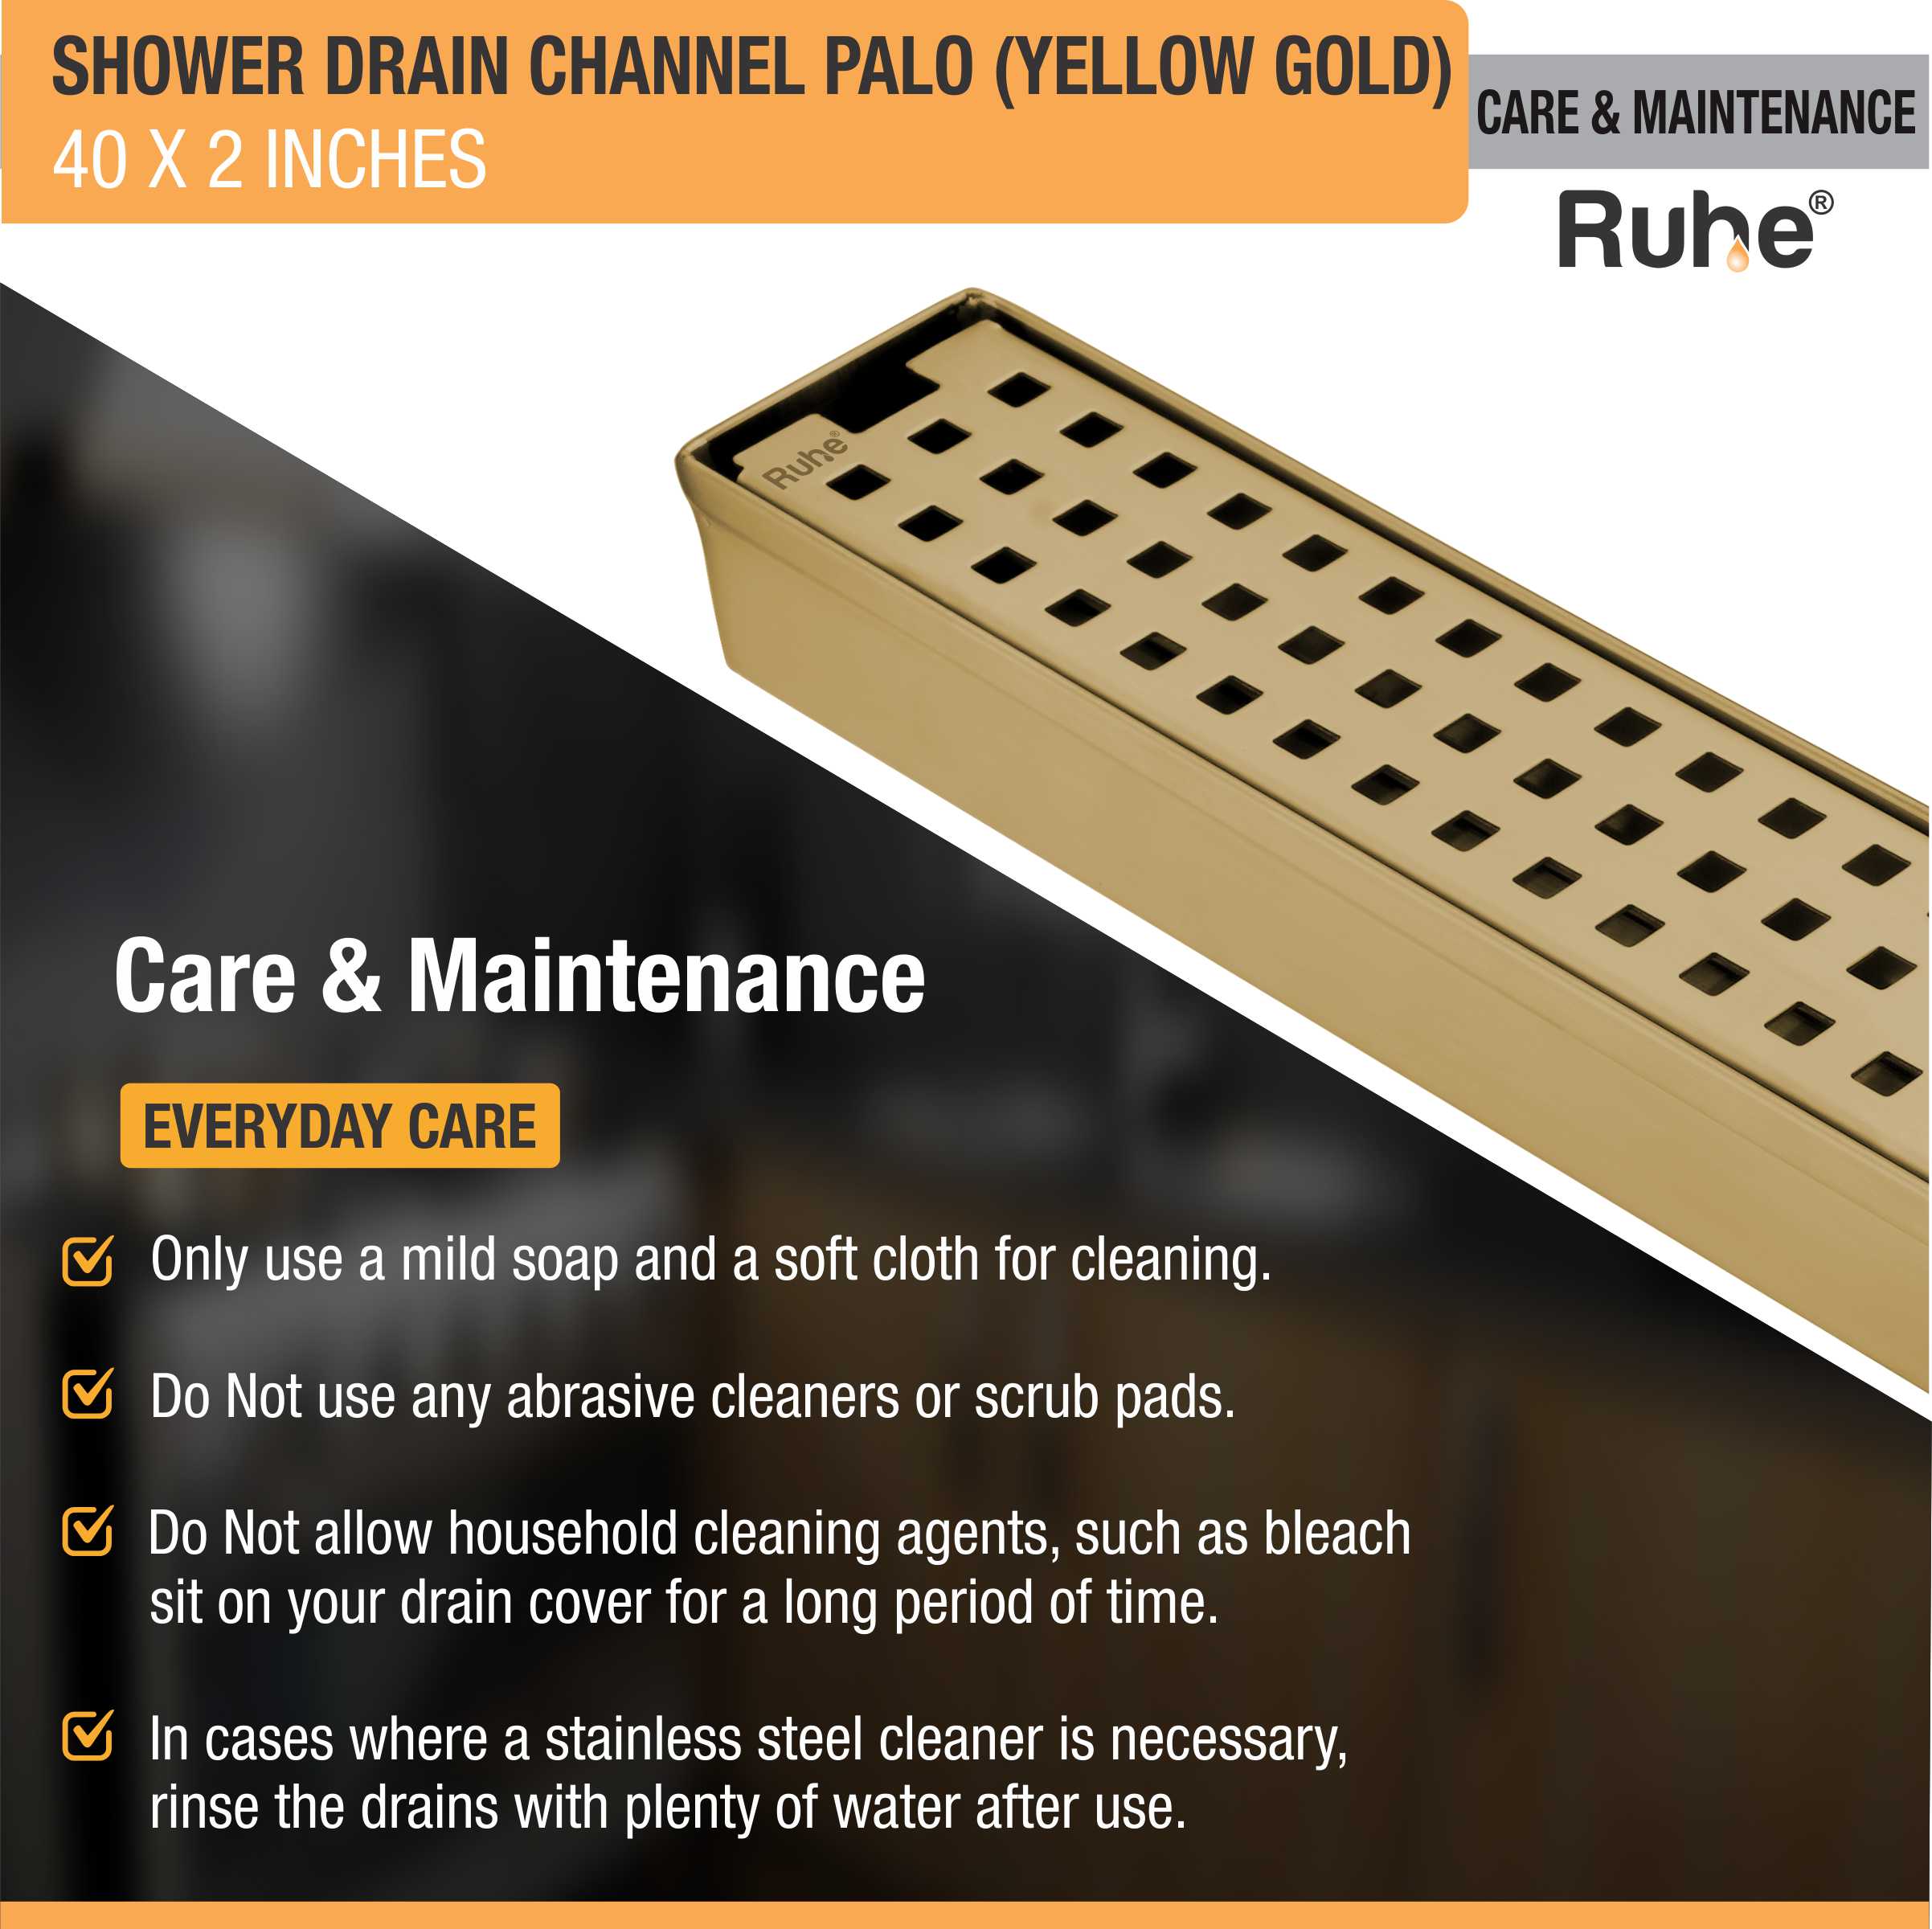 Palo Shower Drain Channel (40 x 2 Inches) YELLOW GOLD care and maintenance